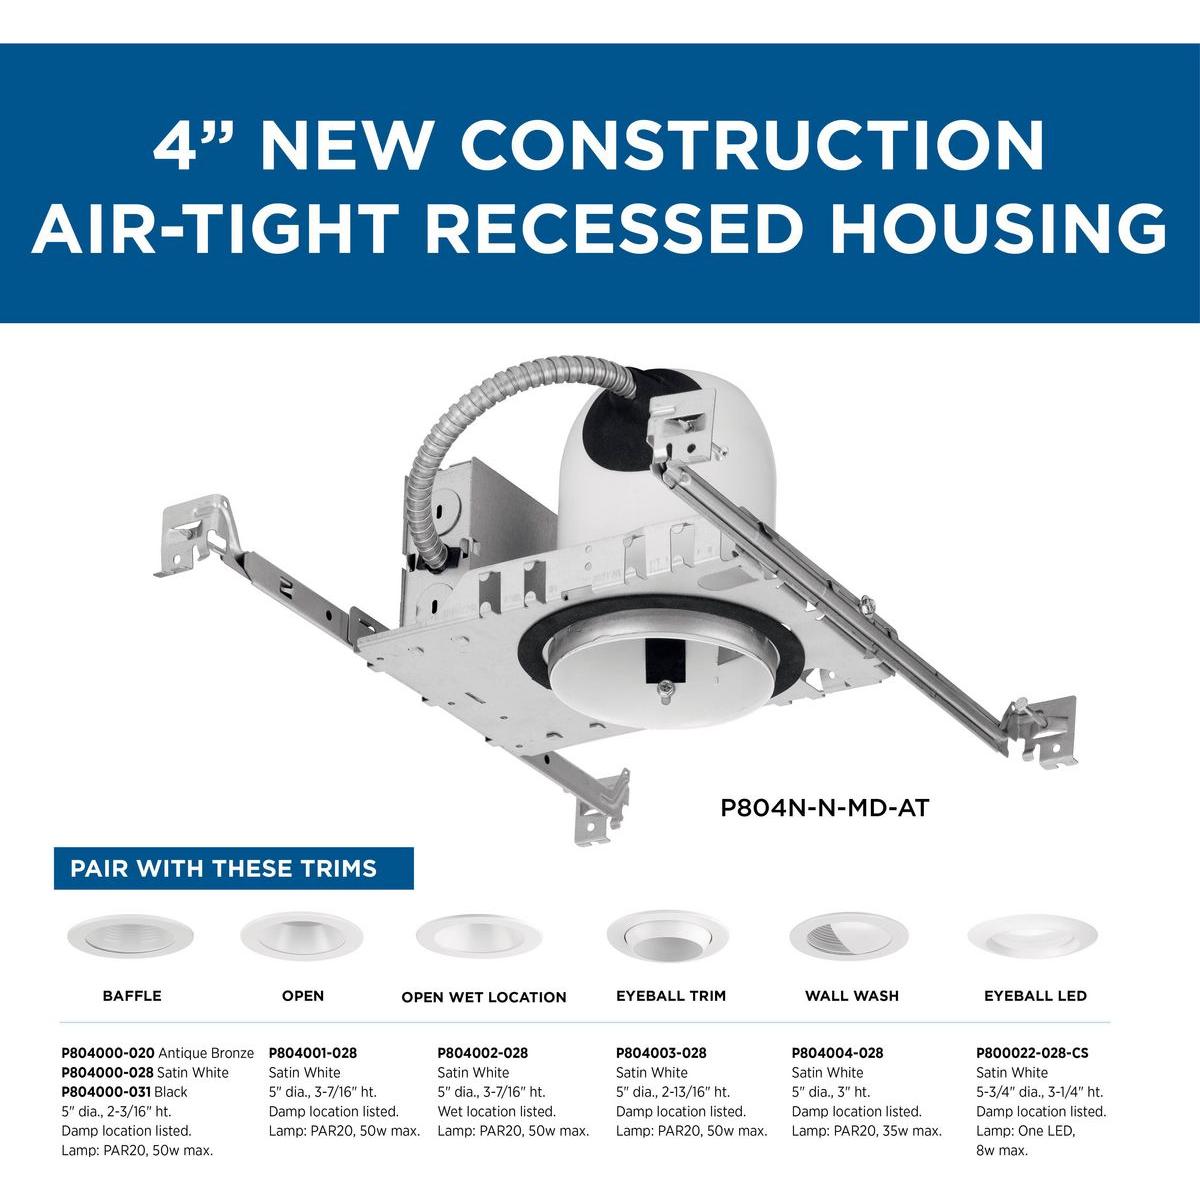 4" Recessed New Air-Tight Housing